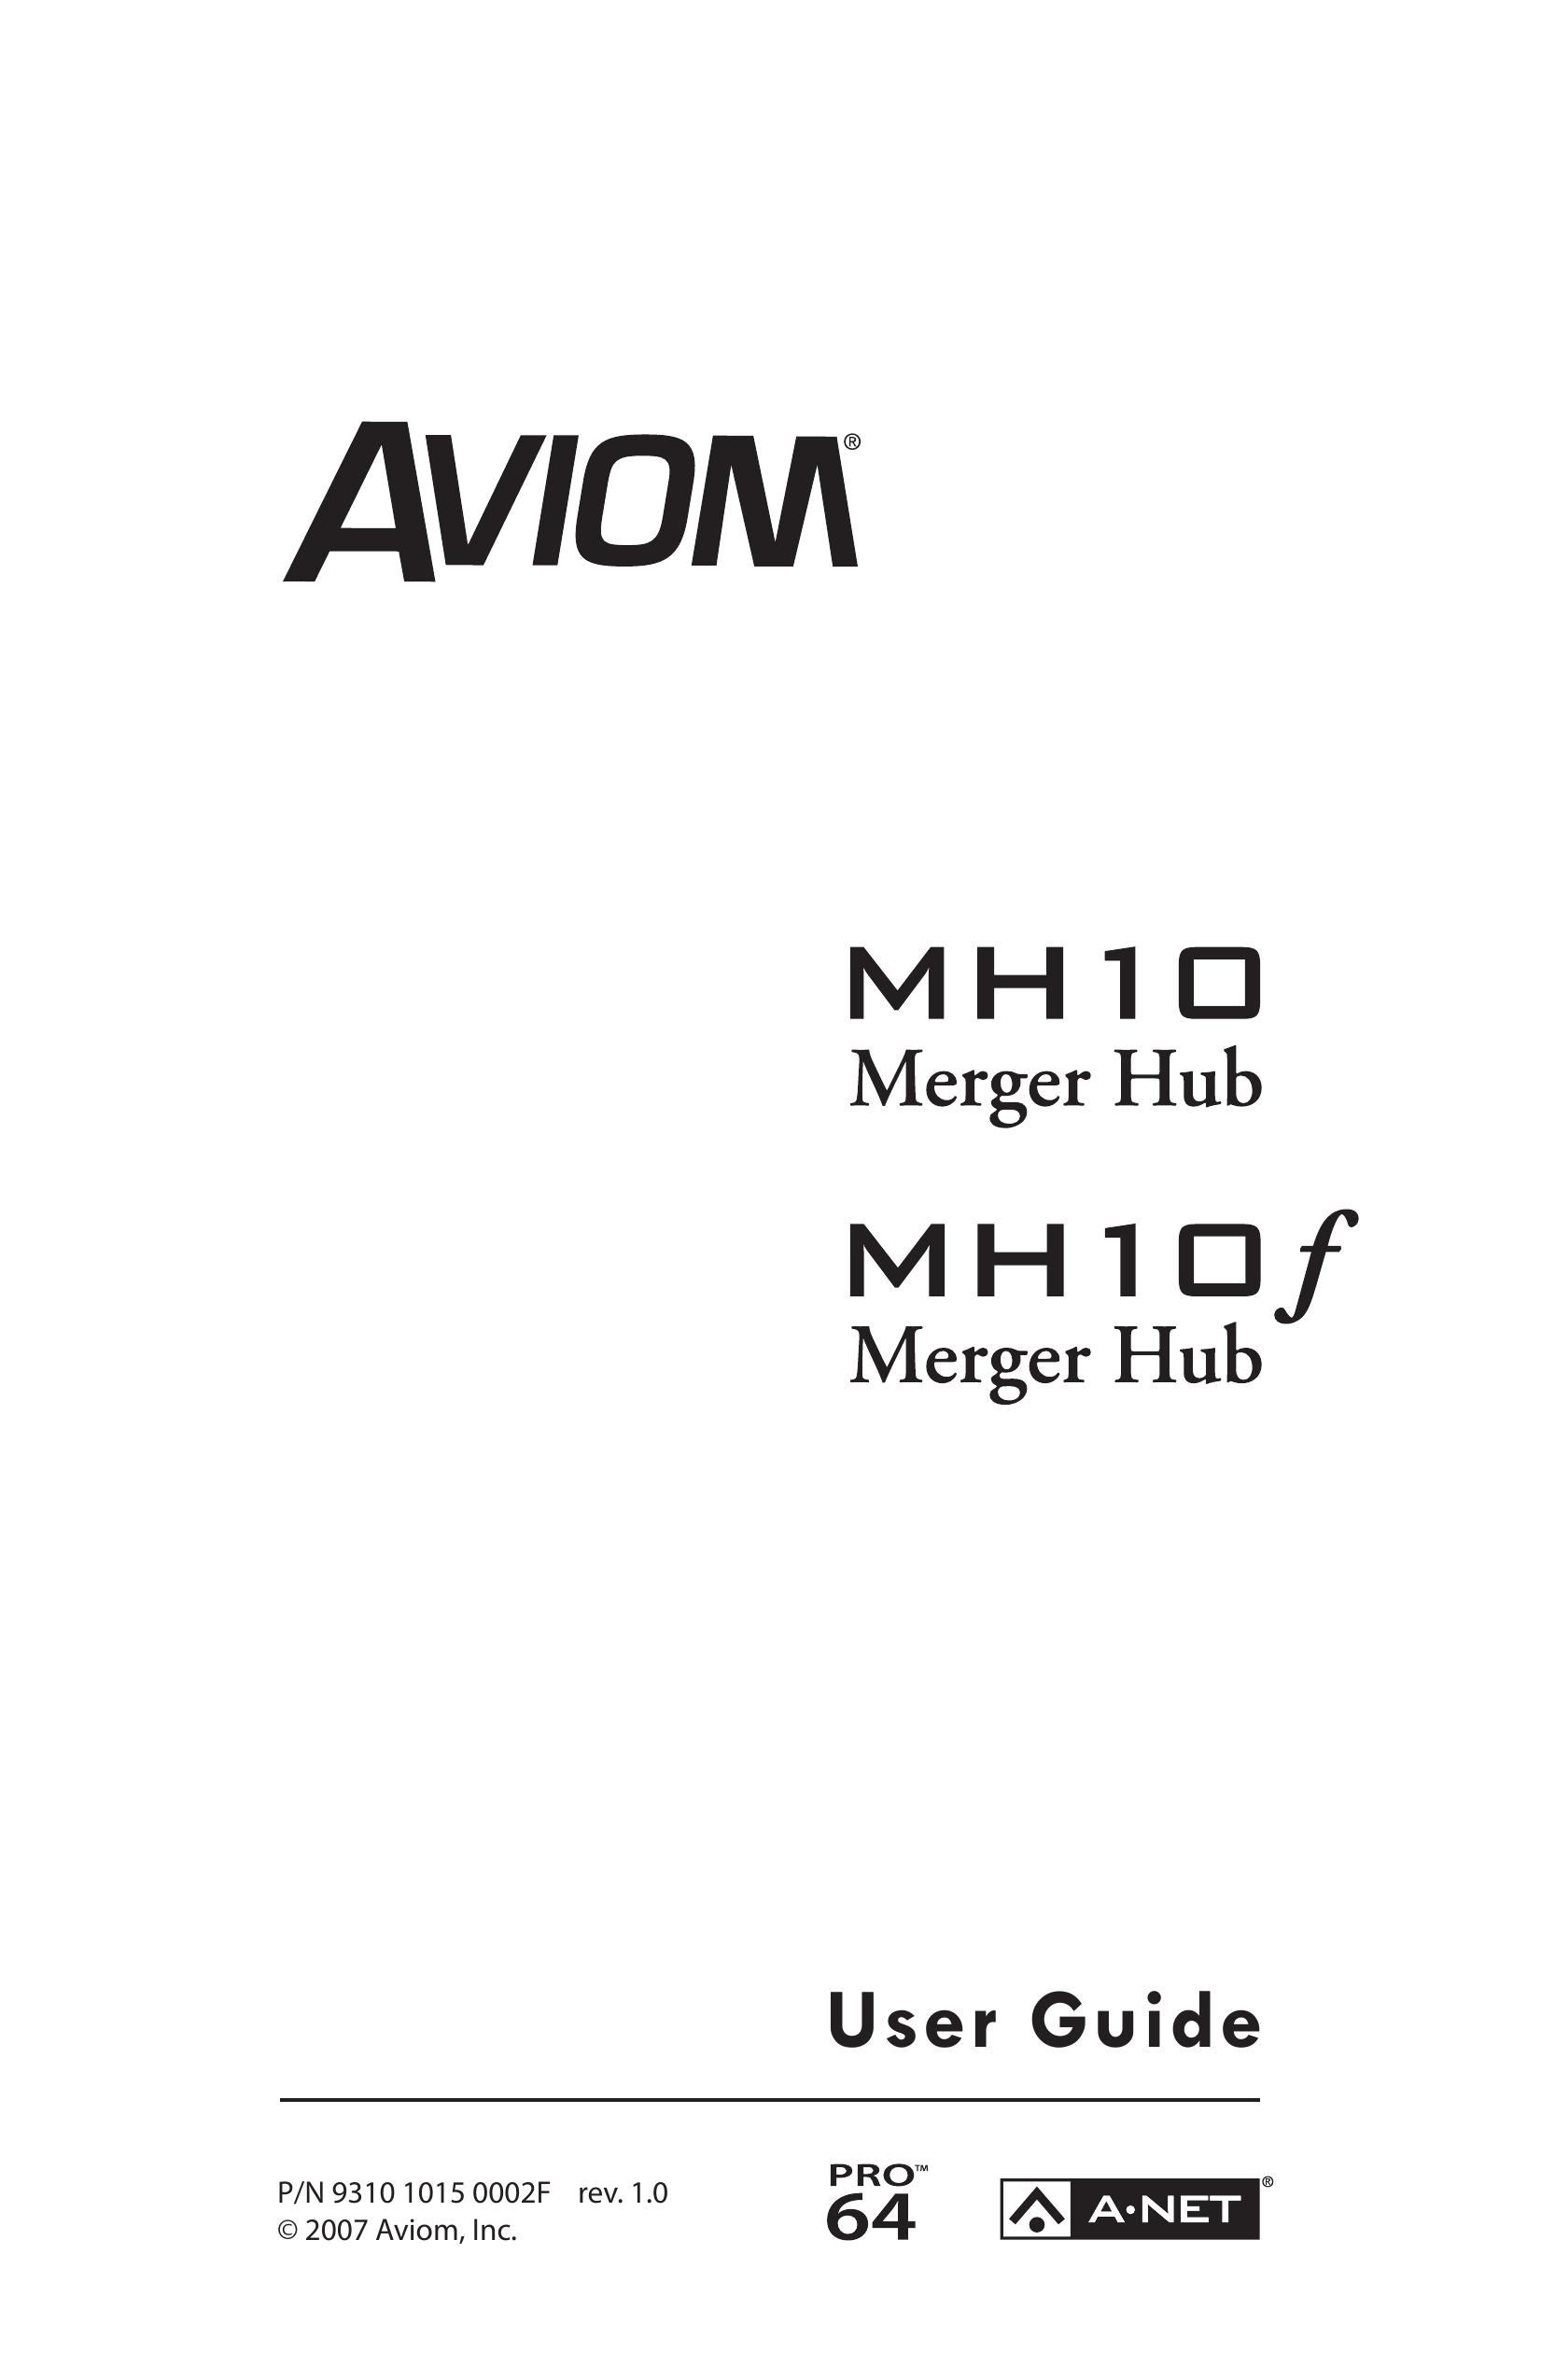 Aviom MH10m Musical Instrument User Manual (Page 1)